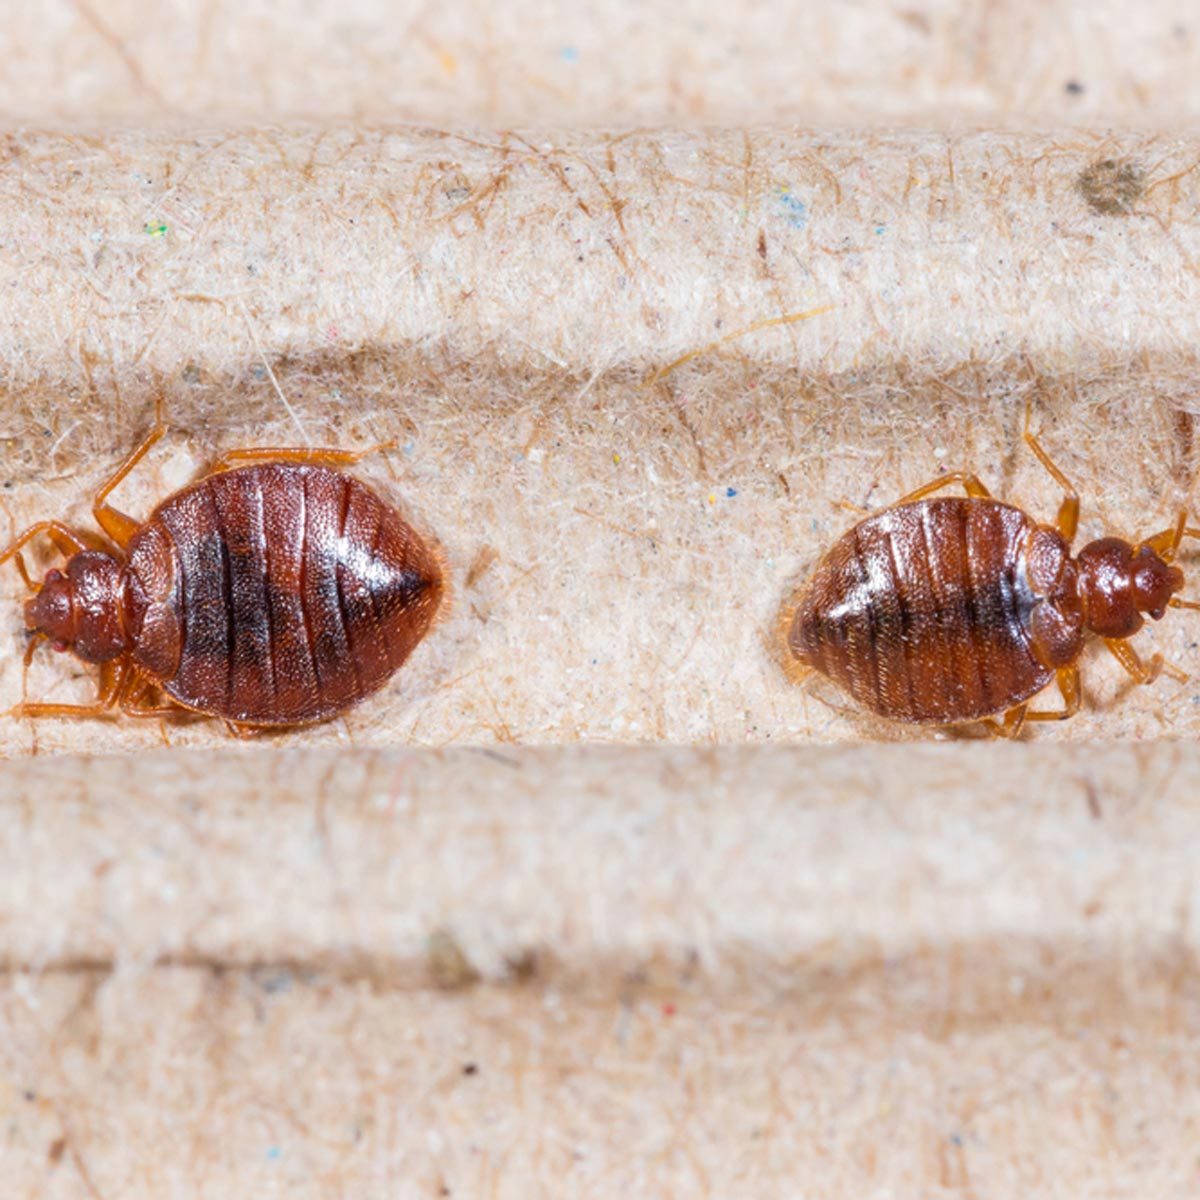 The 16 Most Disgusting House Bugs And How To Get Rid Of Them